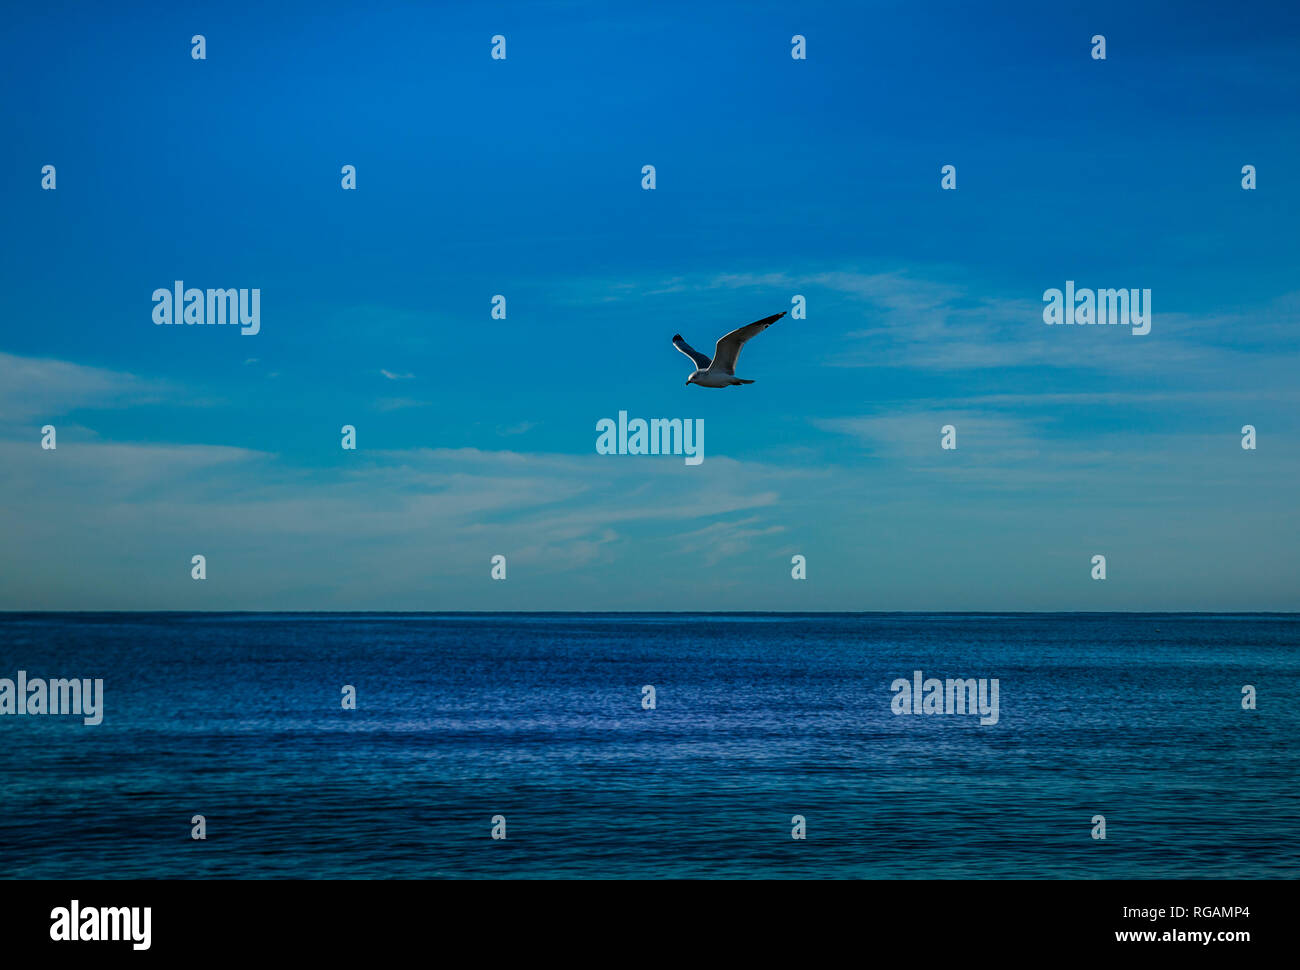 Lone seagull glides over the water in search of food. Northwest coast of Mexico. Stock Photo